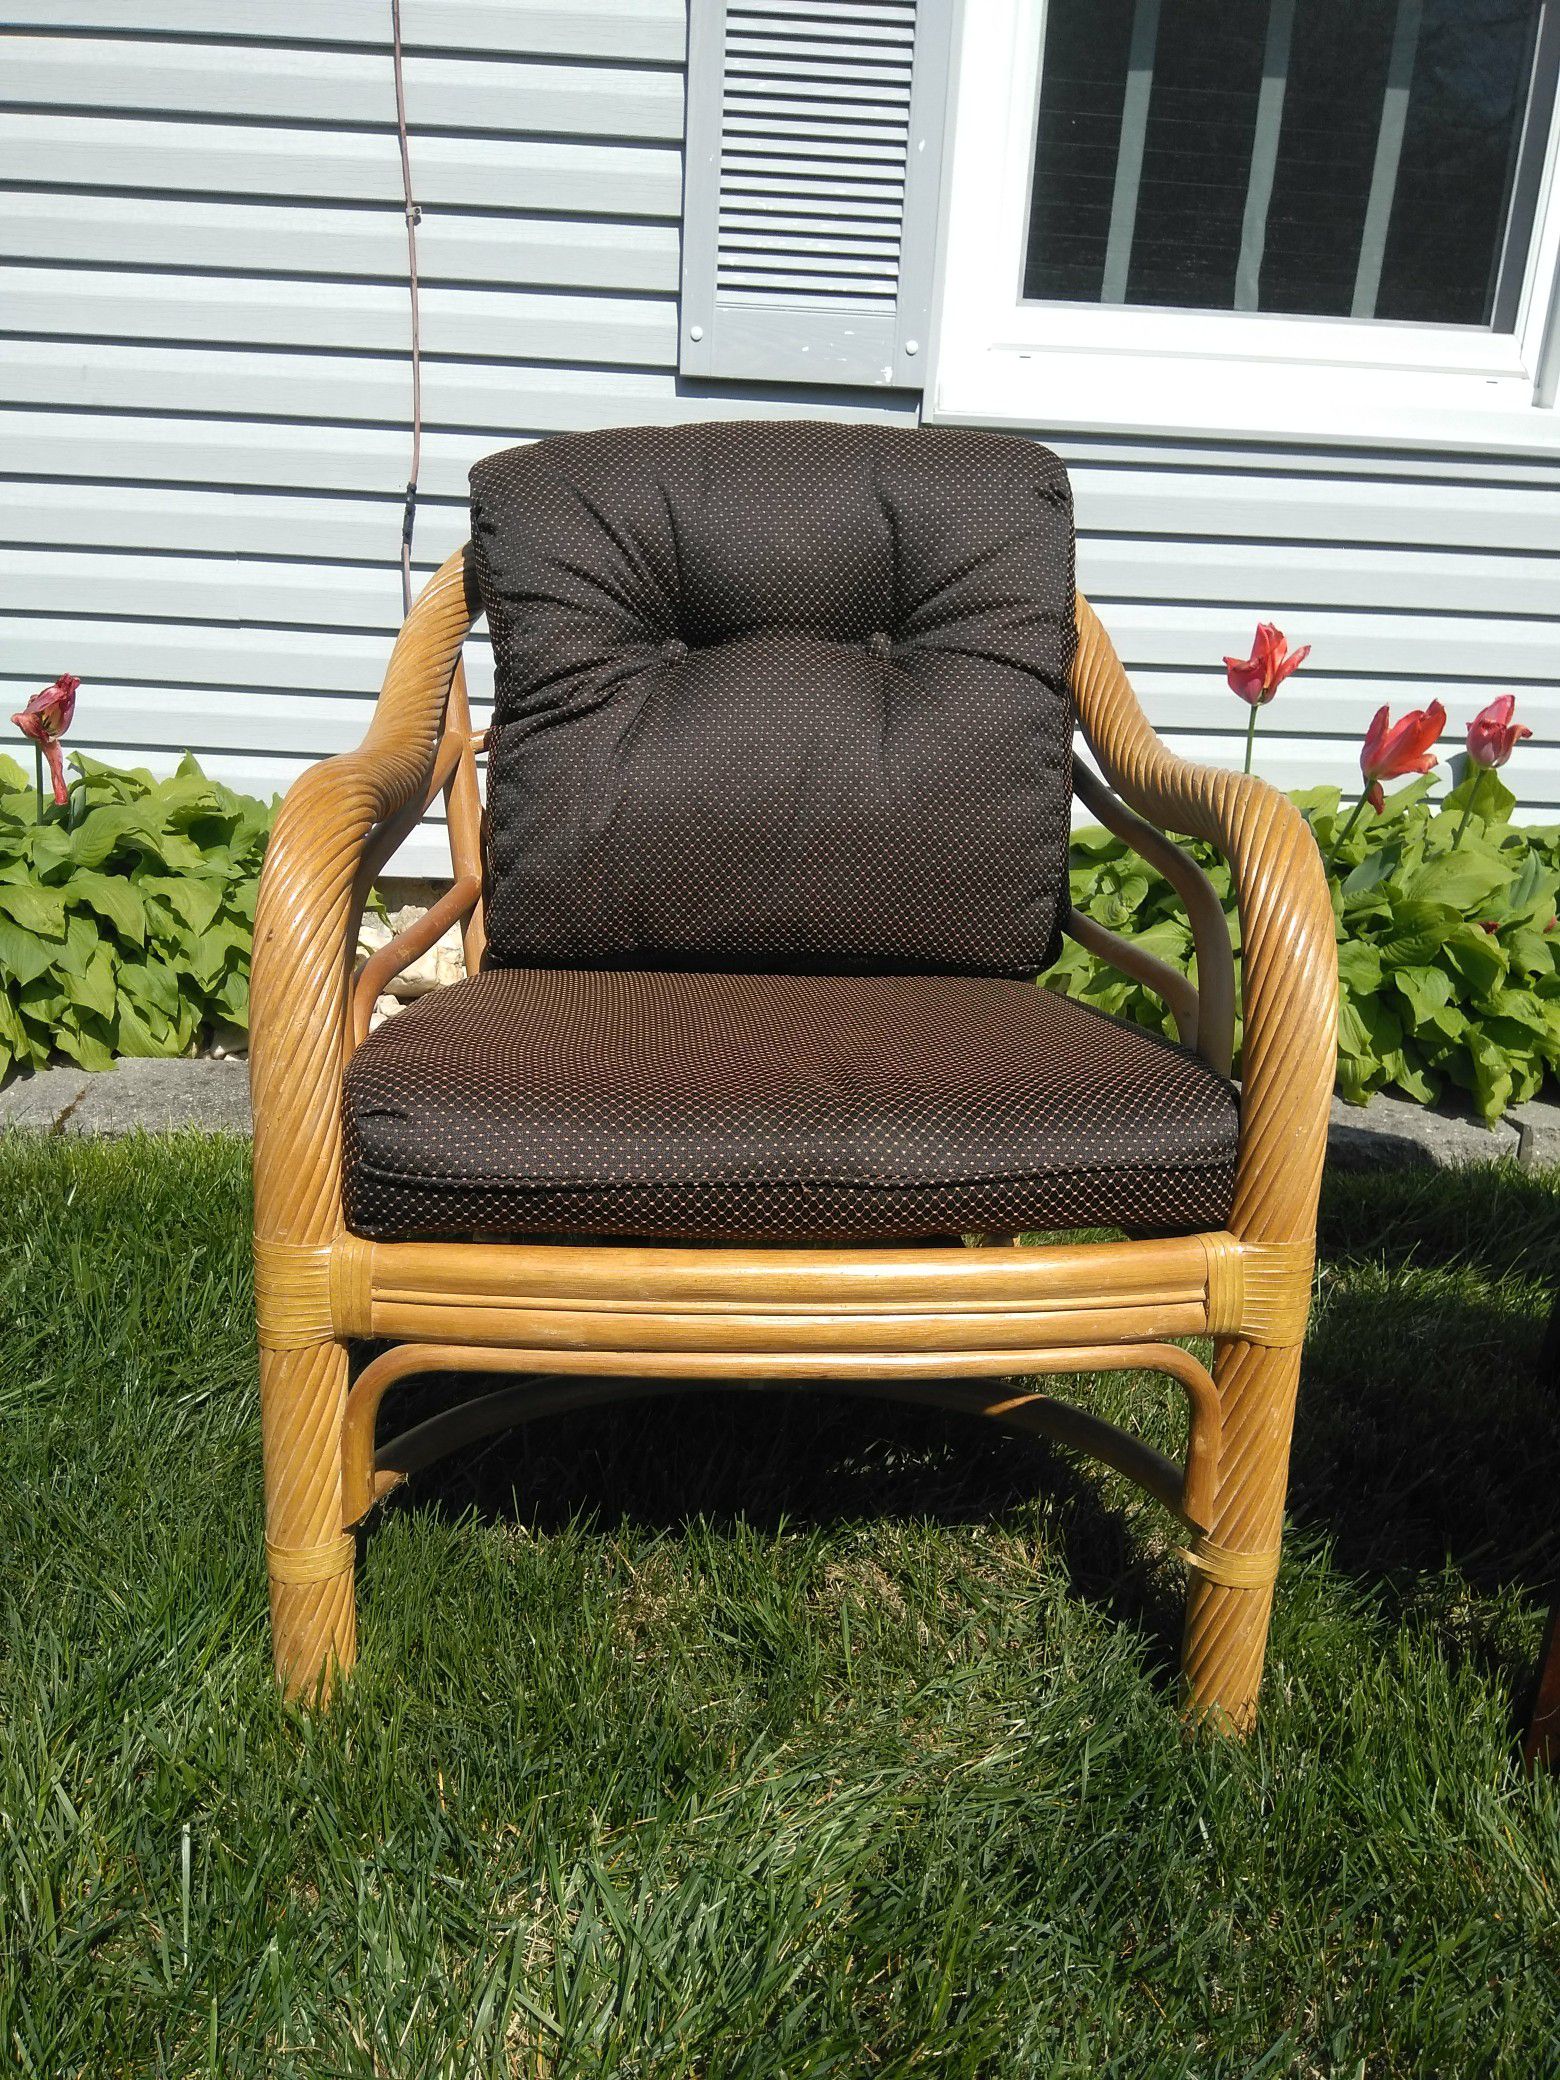 Indoor Outdoor Chair with Custom Upolstrey Cushions Coverings